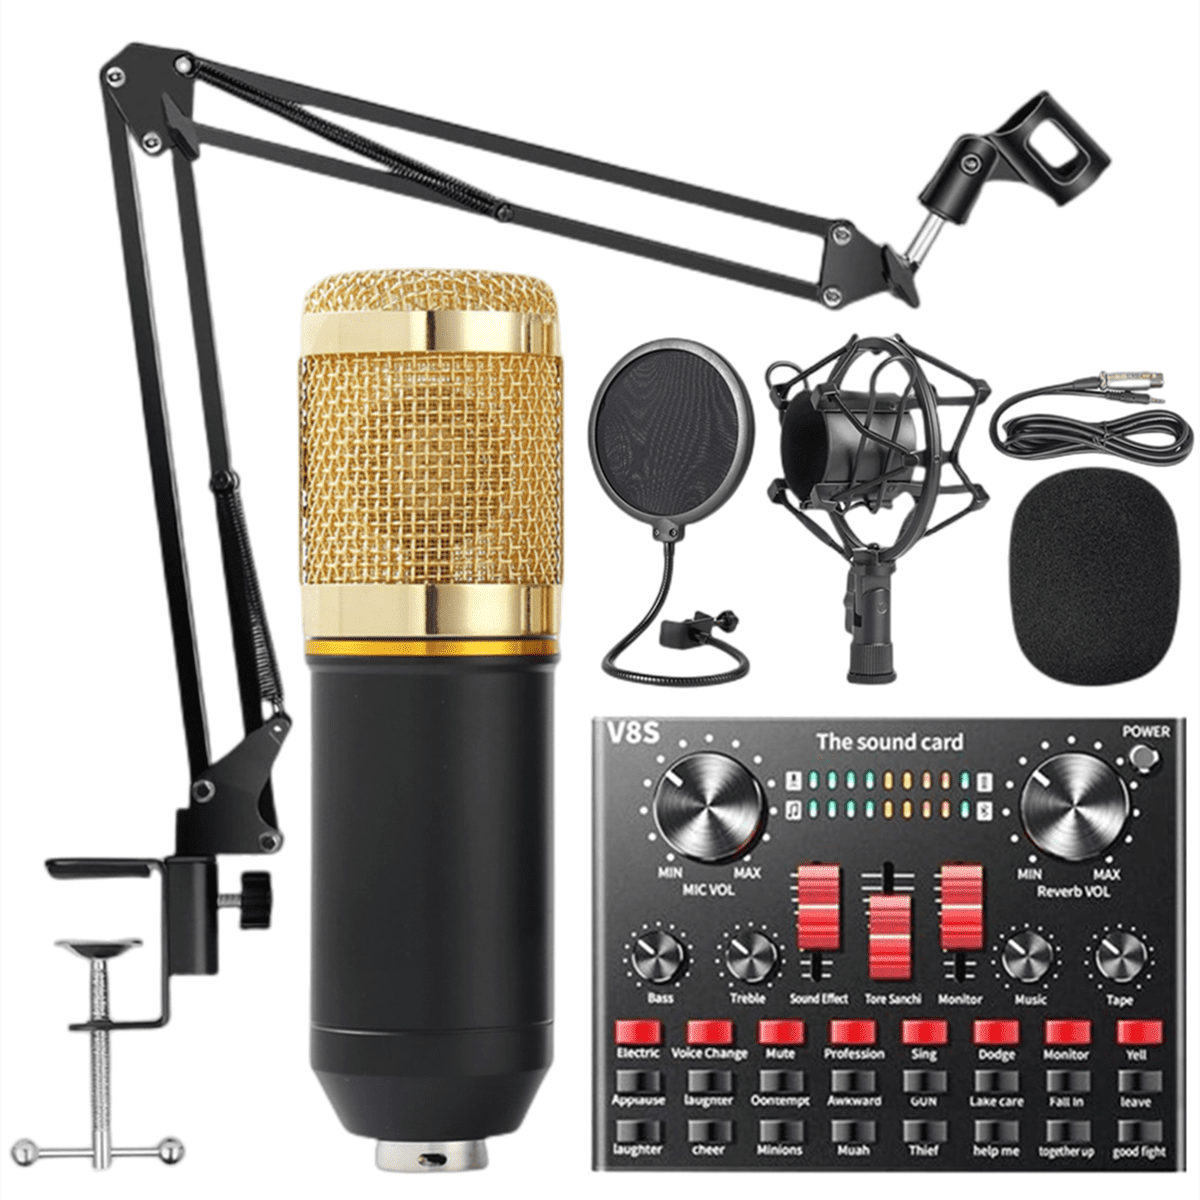 BM-900 Mic Kit with Live Sound Card,Liftable Microphone Tripod and Llive Fill Light for Studio Recording Broadcasting Condenser Microphone Bundle Red 